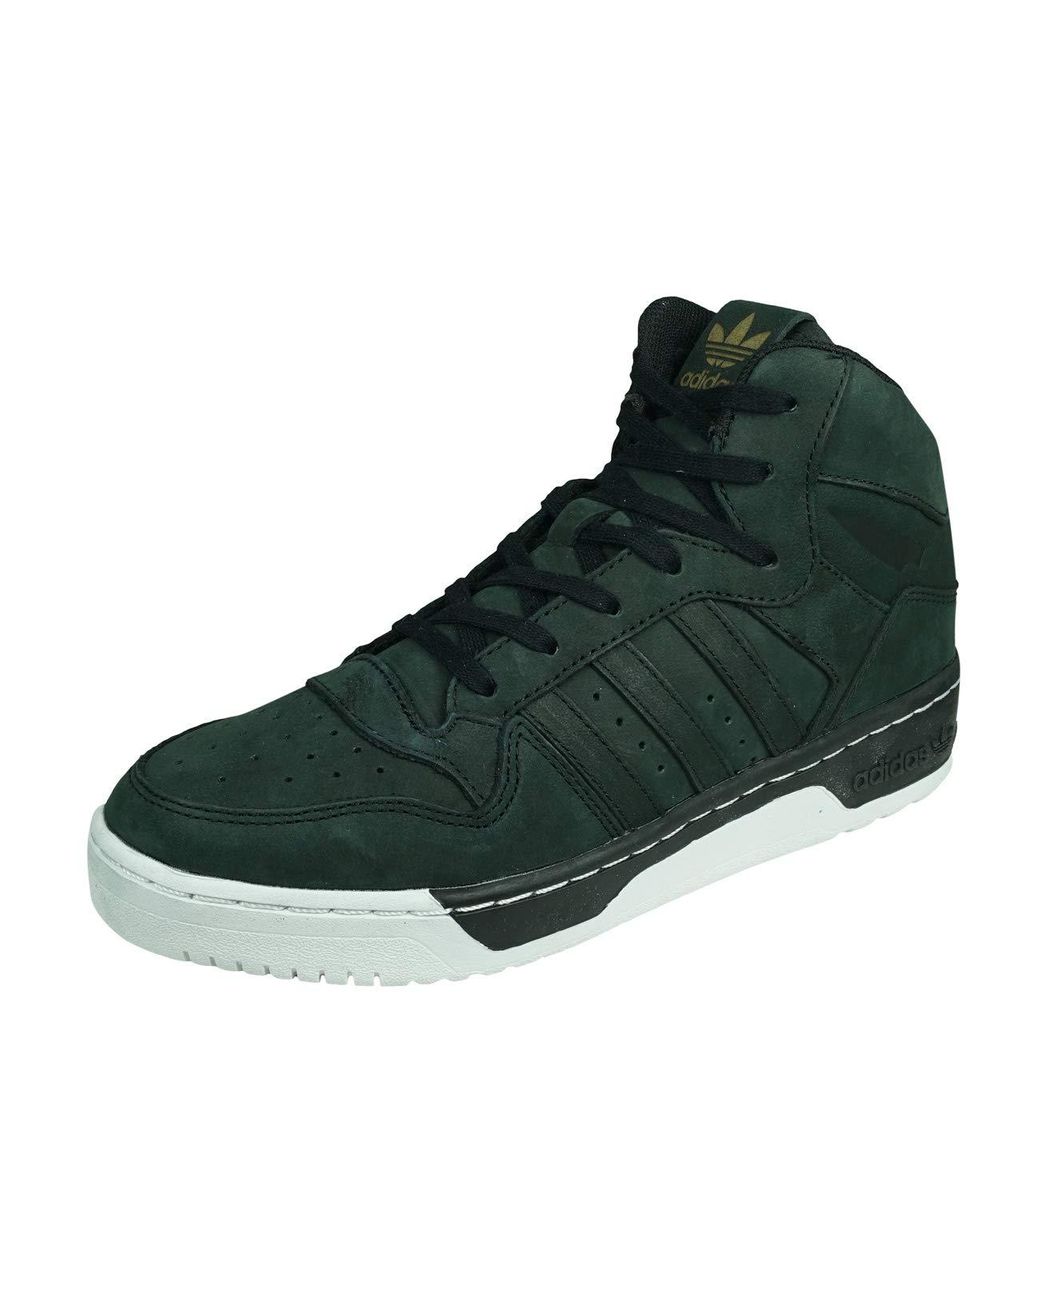 adidas Originals M Attitude Revive S Leather Trainers Hi Tops  Shoes-black-4.5 in Green | Lyst UK